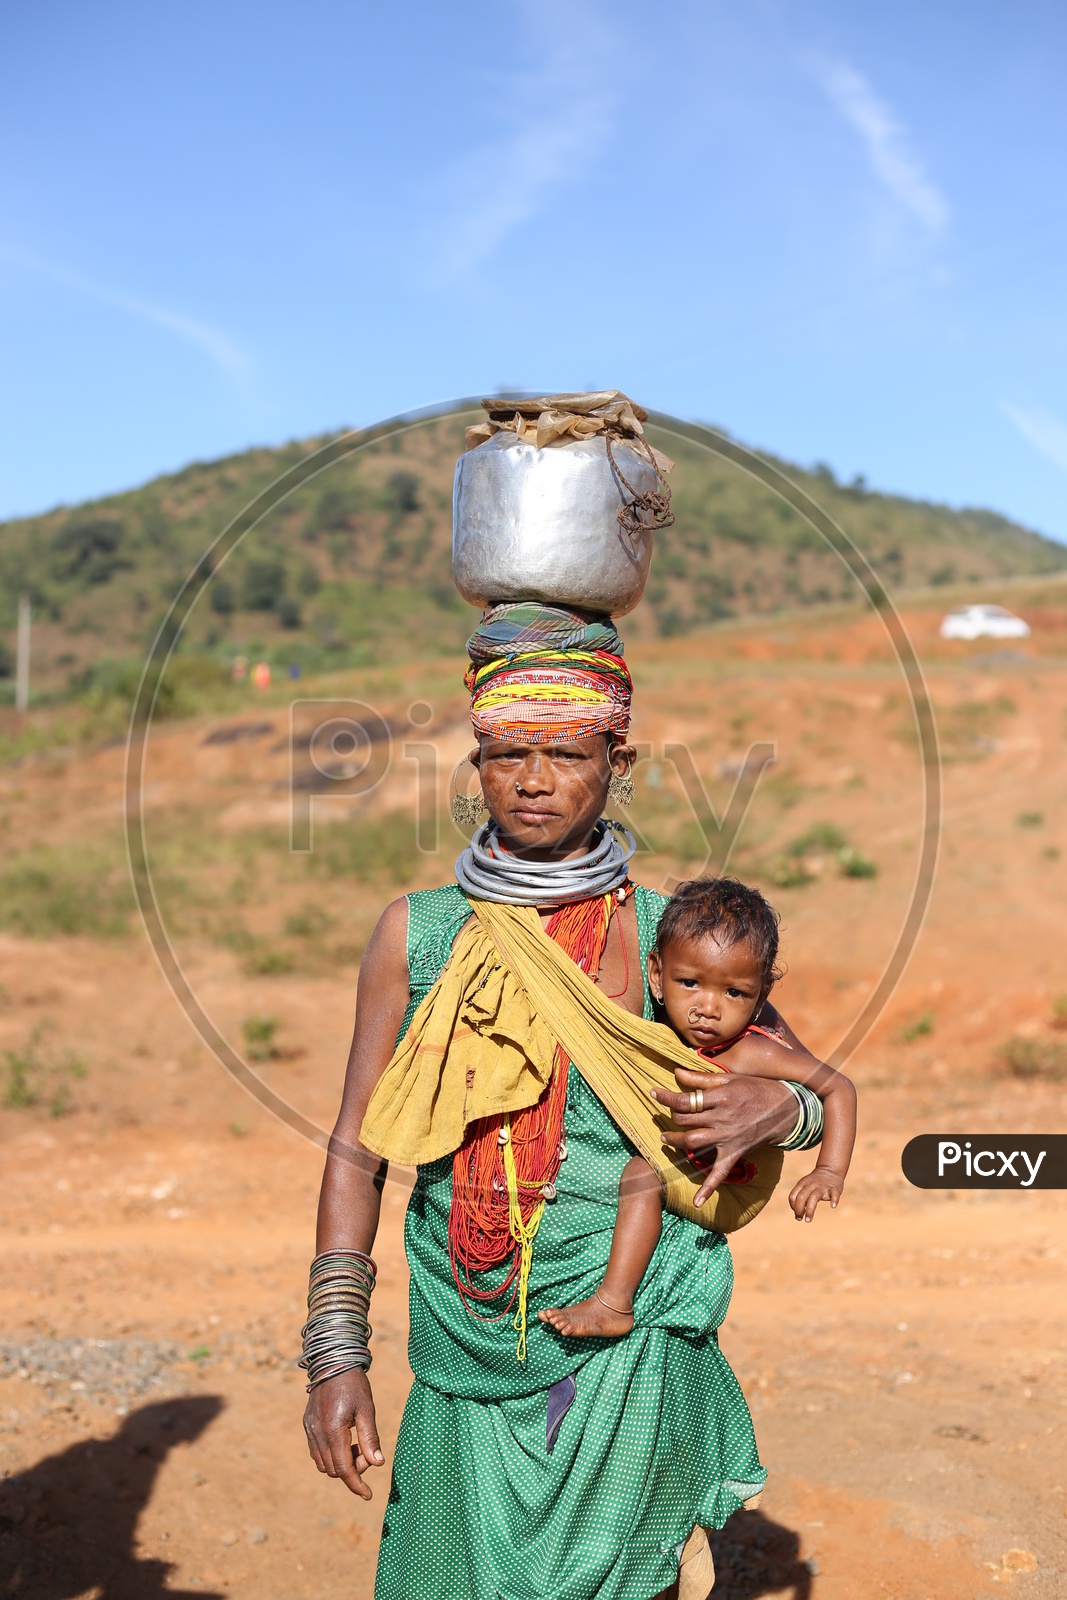 Bonda Tribal Woman Carrying Water Vessel And Her Child And Walking along Tribal Village Roads